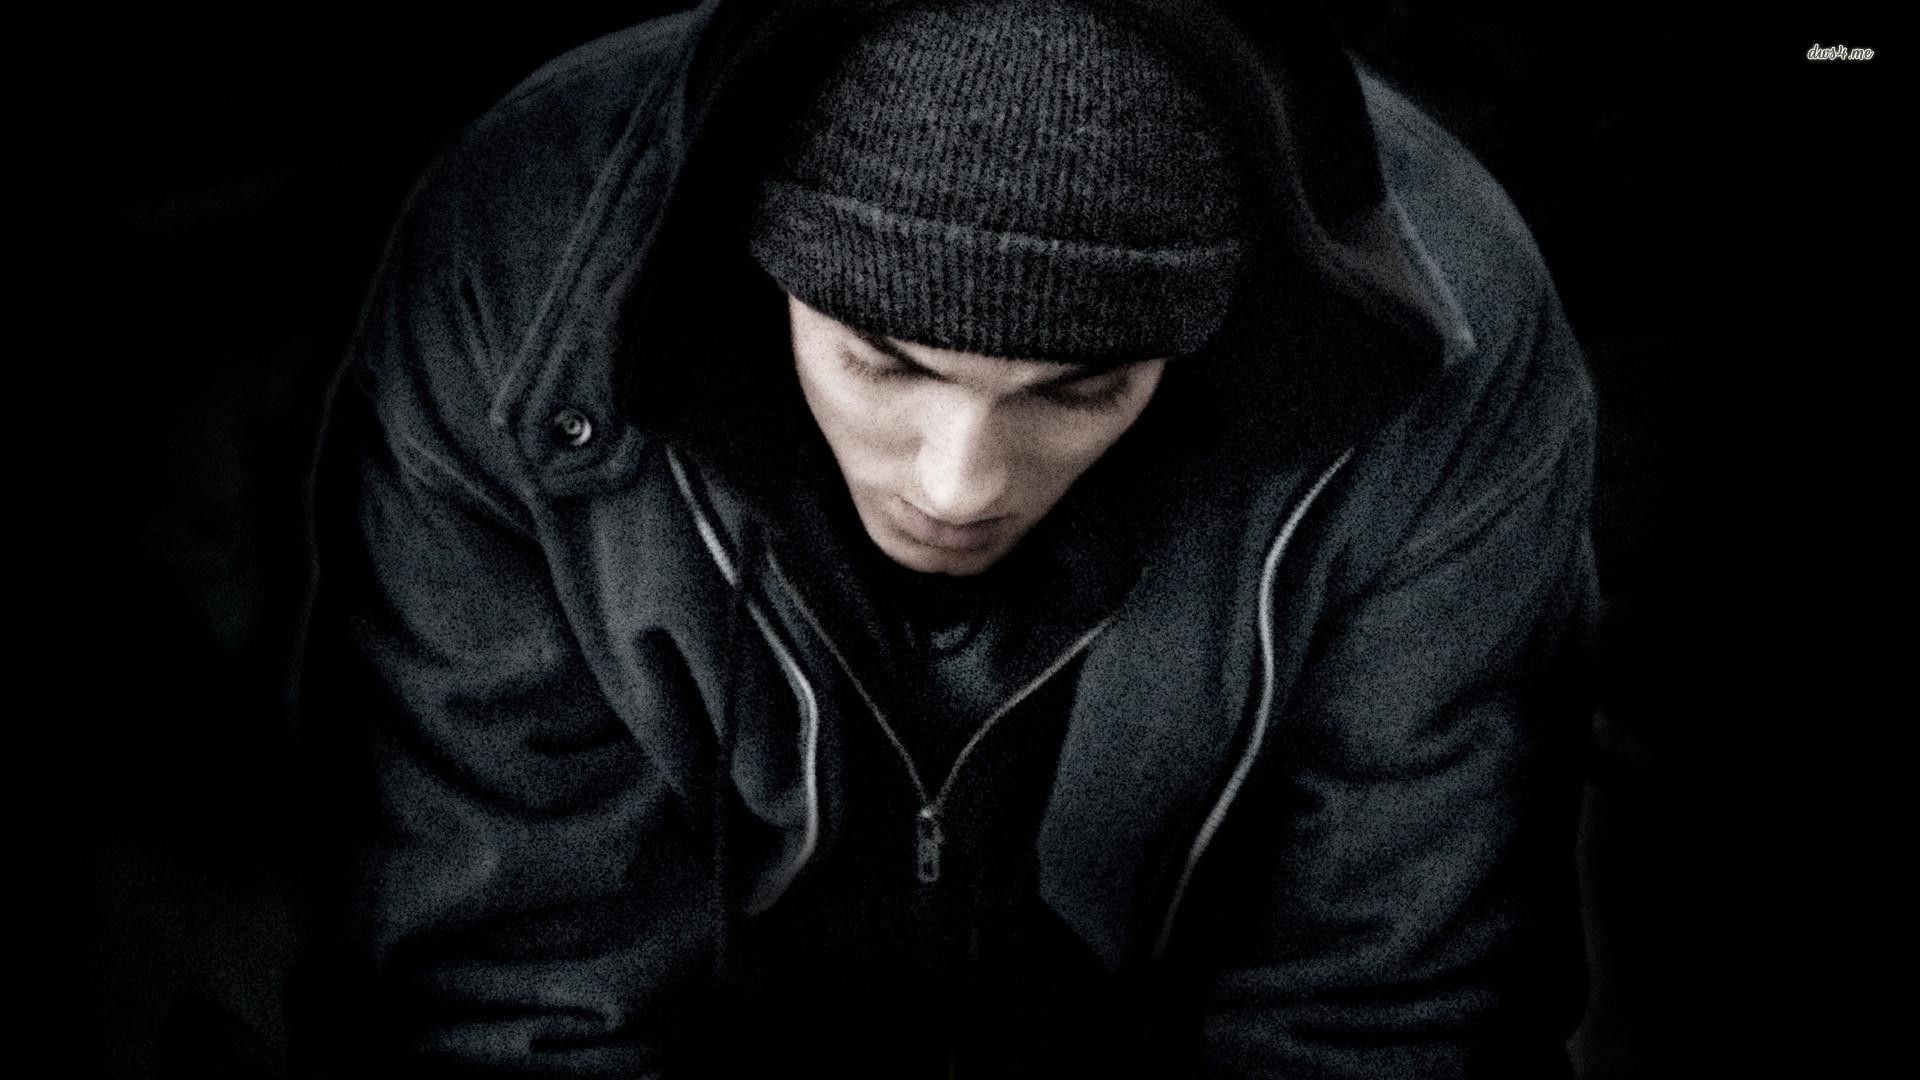 1920x1080 ... Eminem Wallpapers 8 Mile 8 Mile | Free Desktop Wallpapers for  Widescreen, HD and Mobile ...